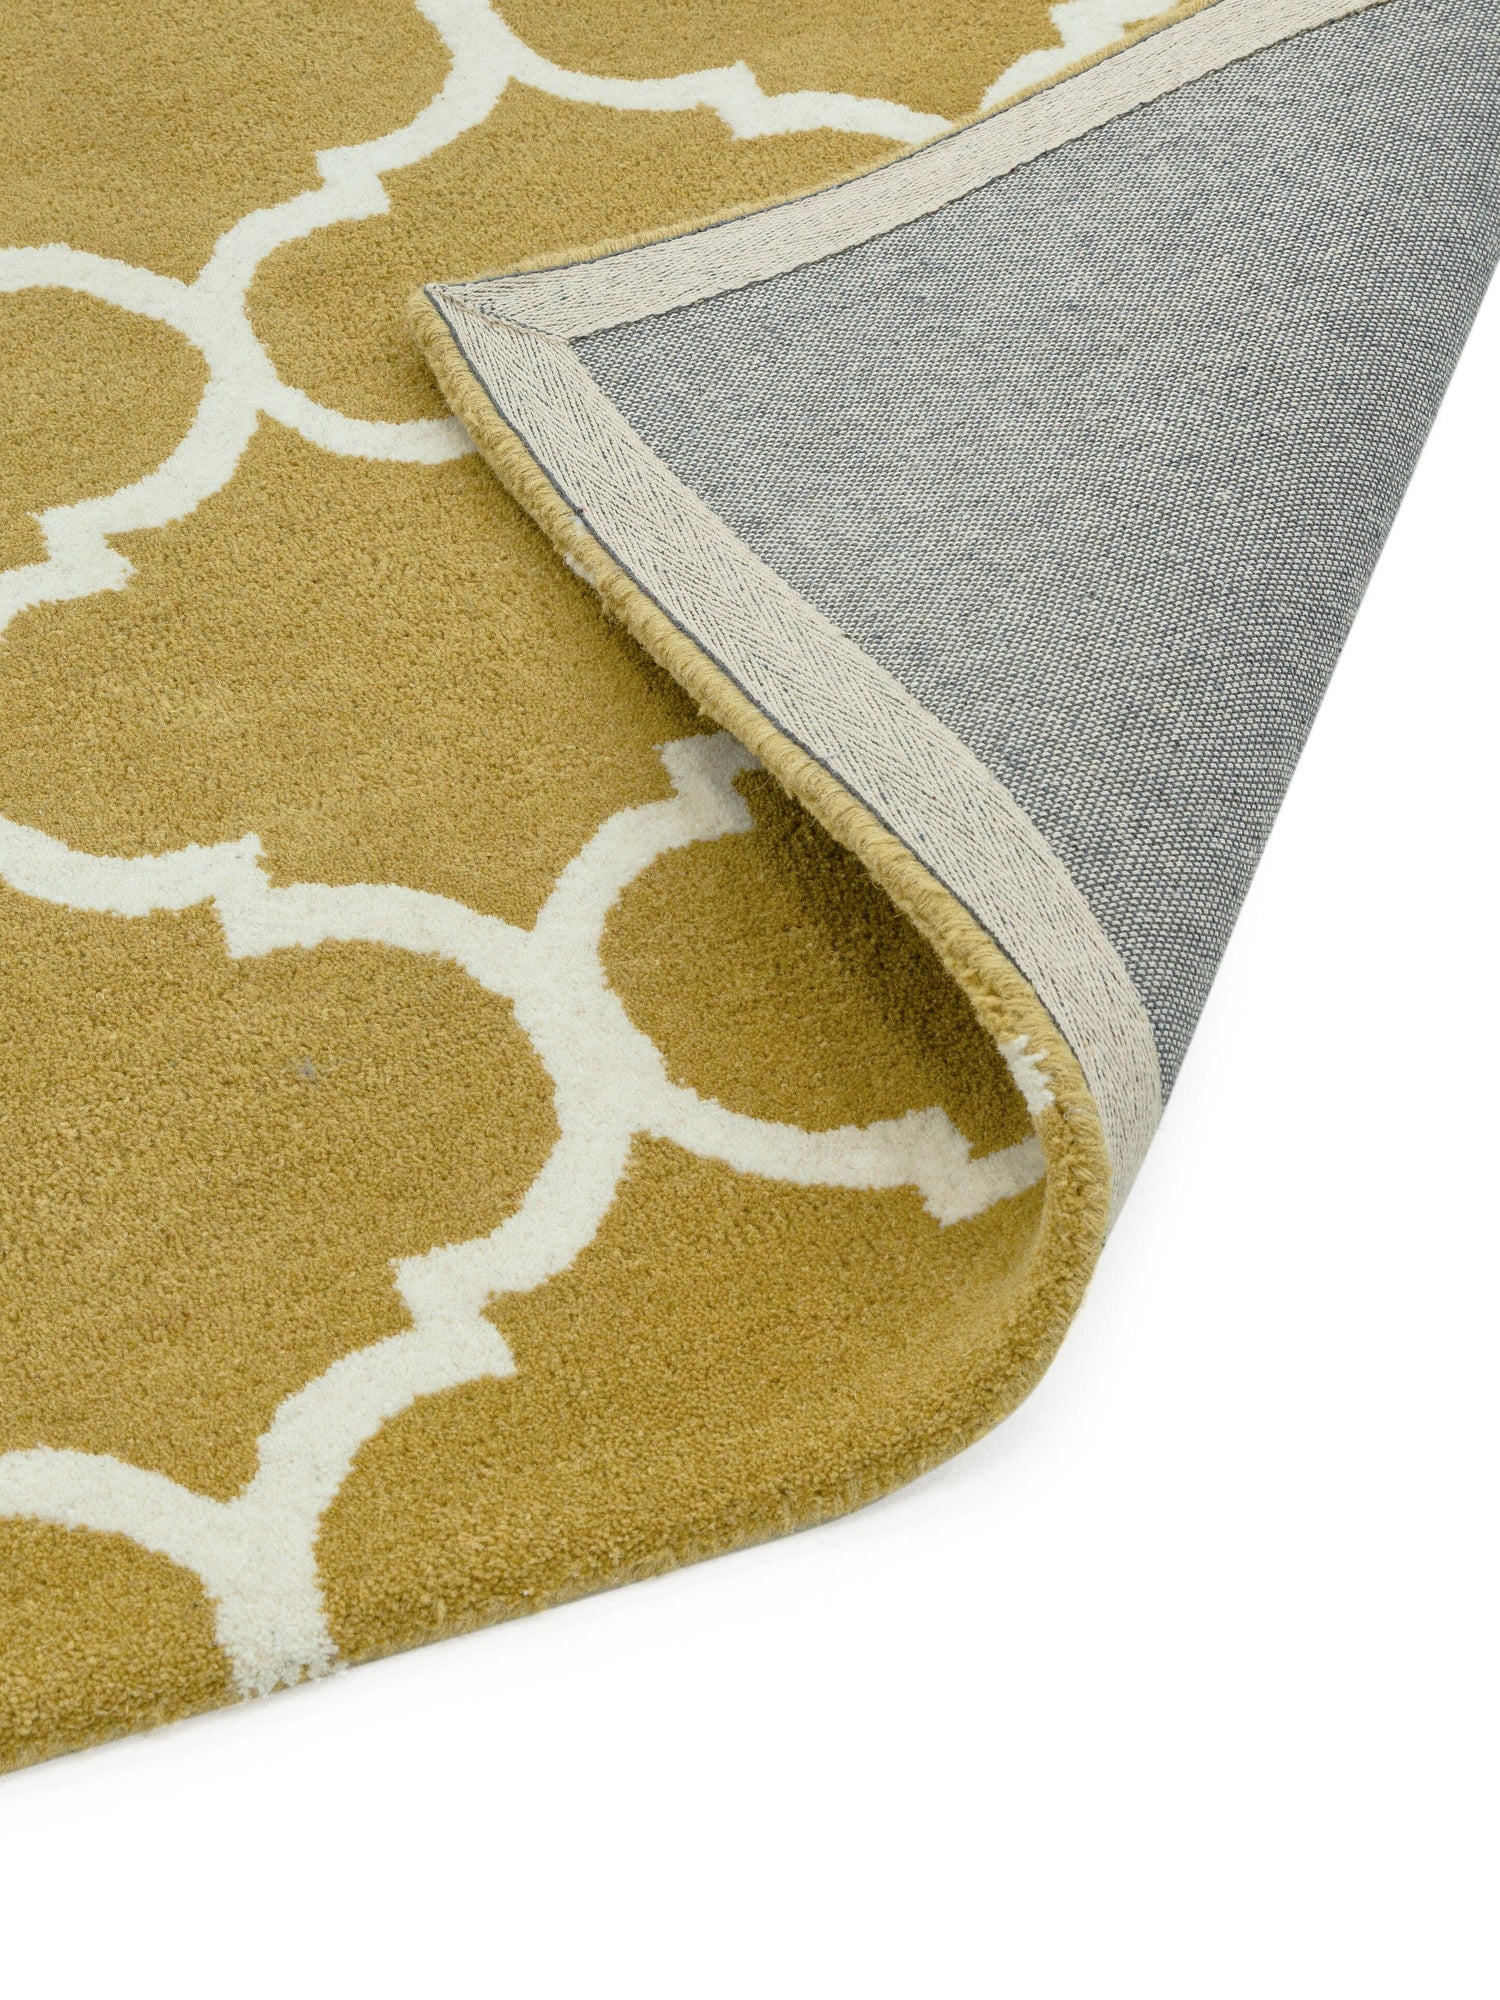  Asiatic Carpets-Asiatic Carpets Albany Handtufted Rug Ogee Ochre - 160 x 230cm-Yellow, Gold 789 